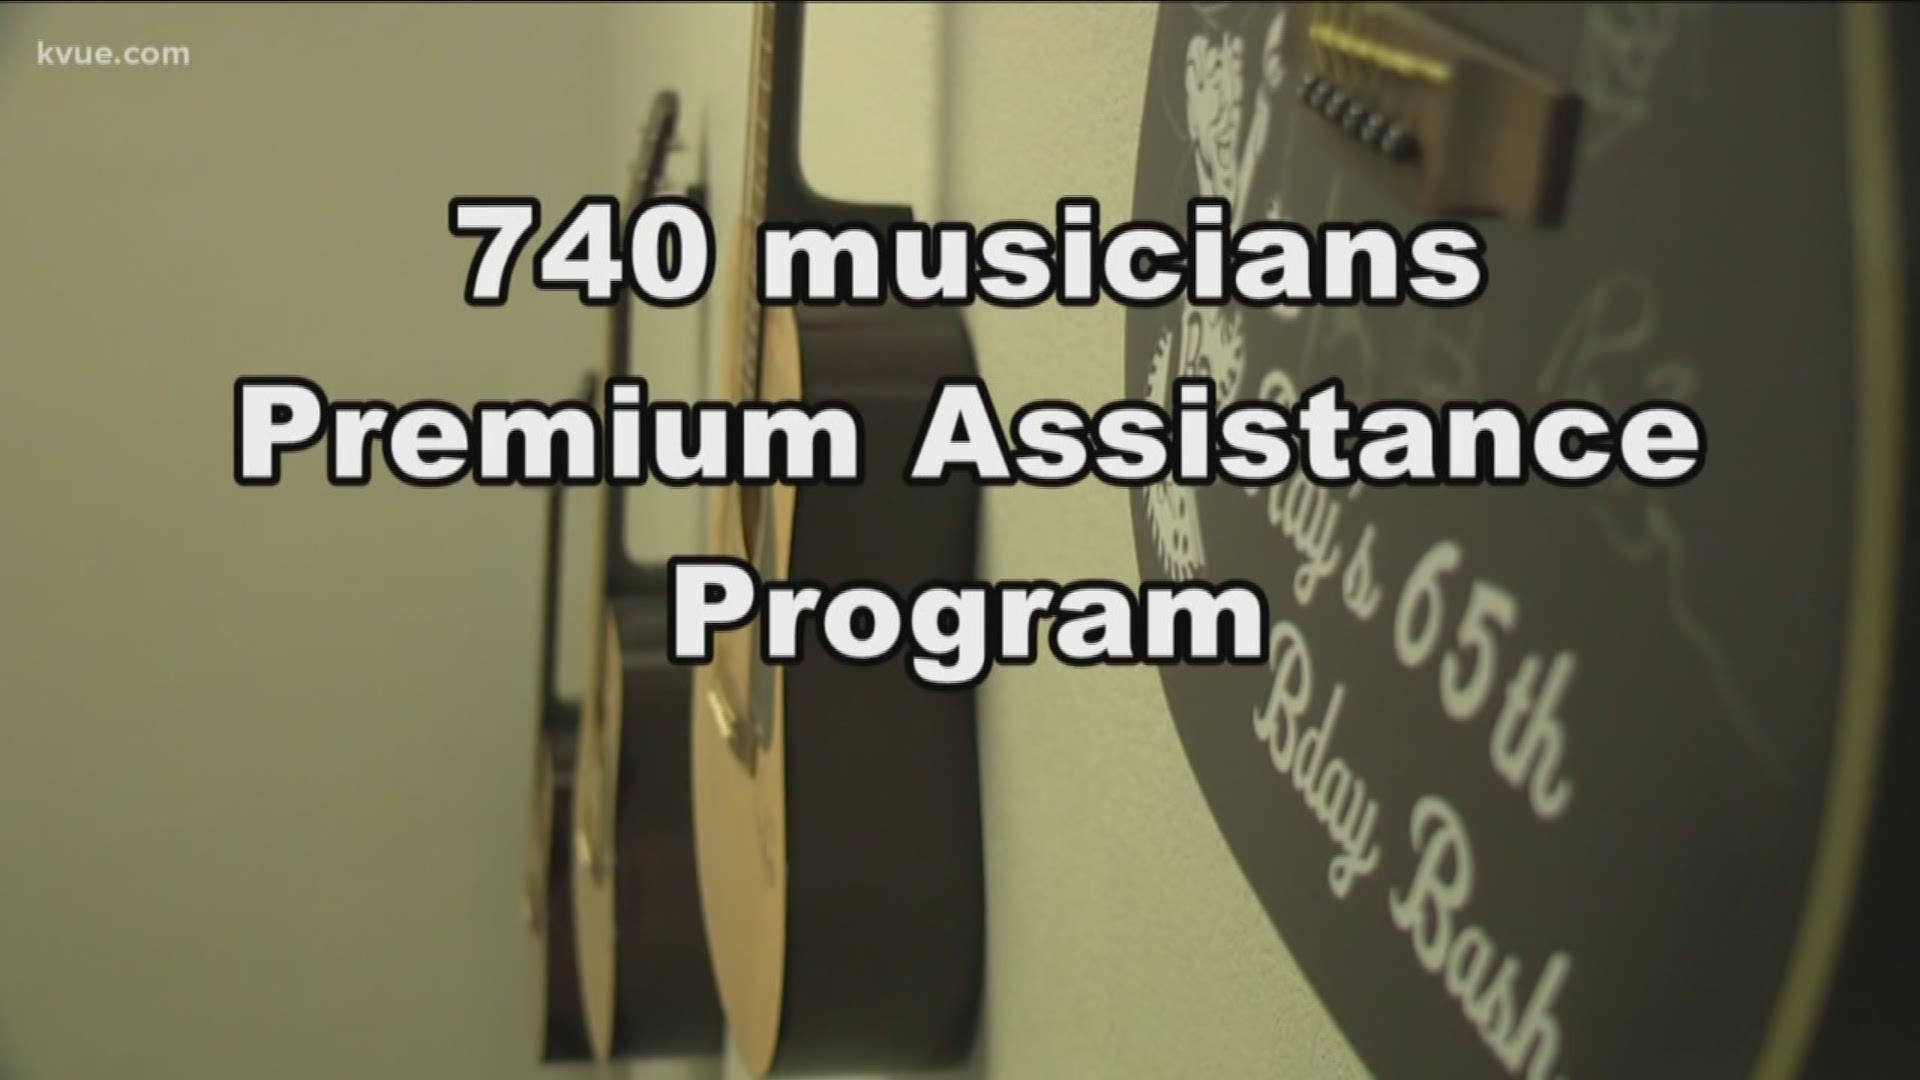 Hospital bills can be expensive. Even if you have insurance. Imagine making less than 24-thousand dollars a year at a job that doesn't provide insurance. That's the life of musicians. And that's where the Health Alliance for Austin Musicans - or HAAM -- h